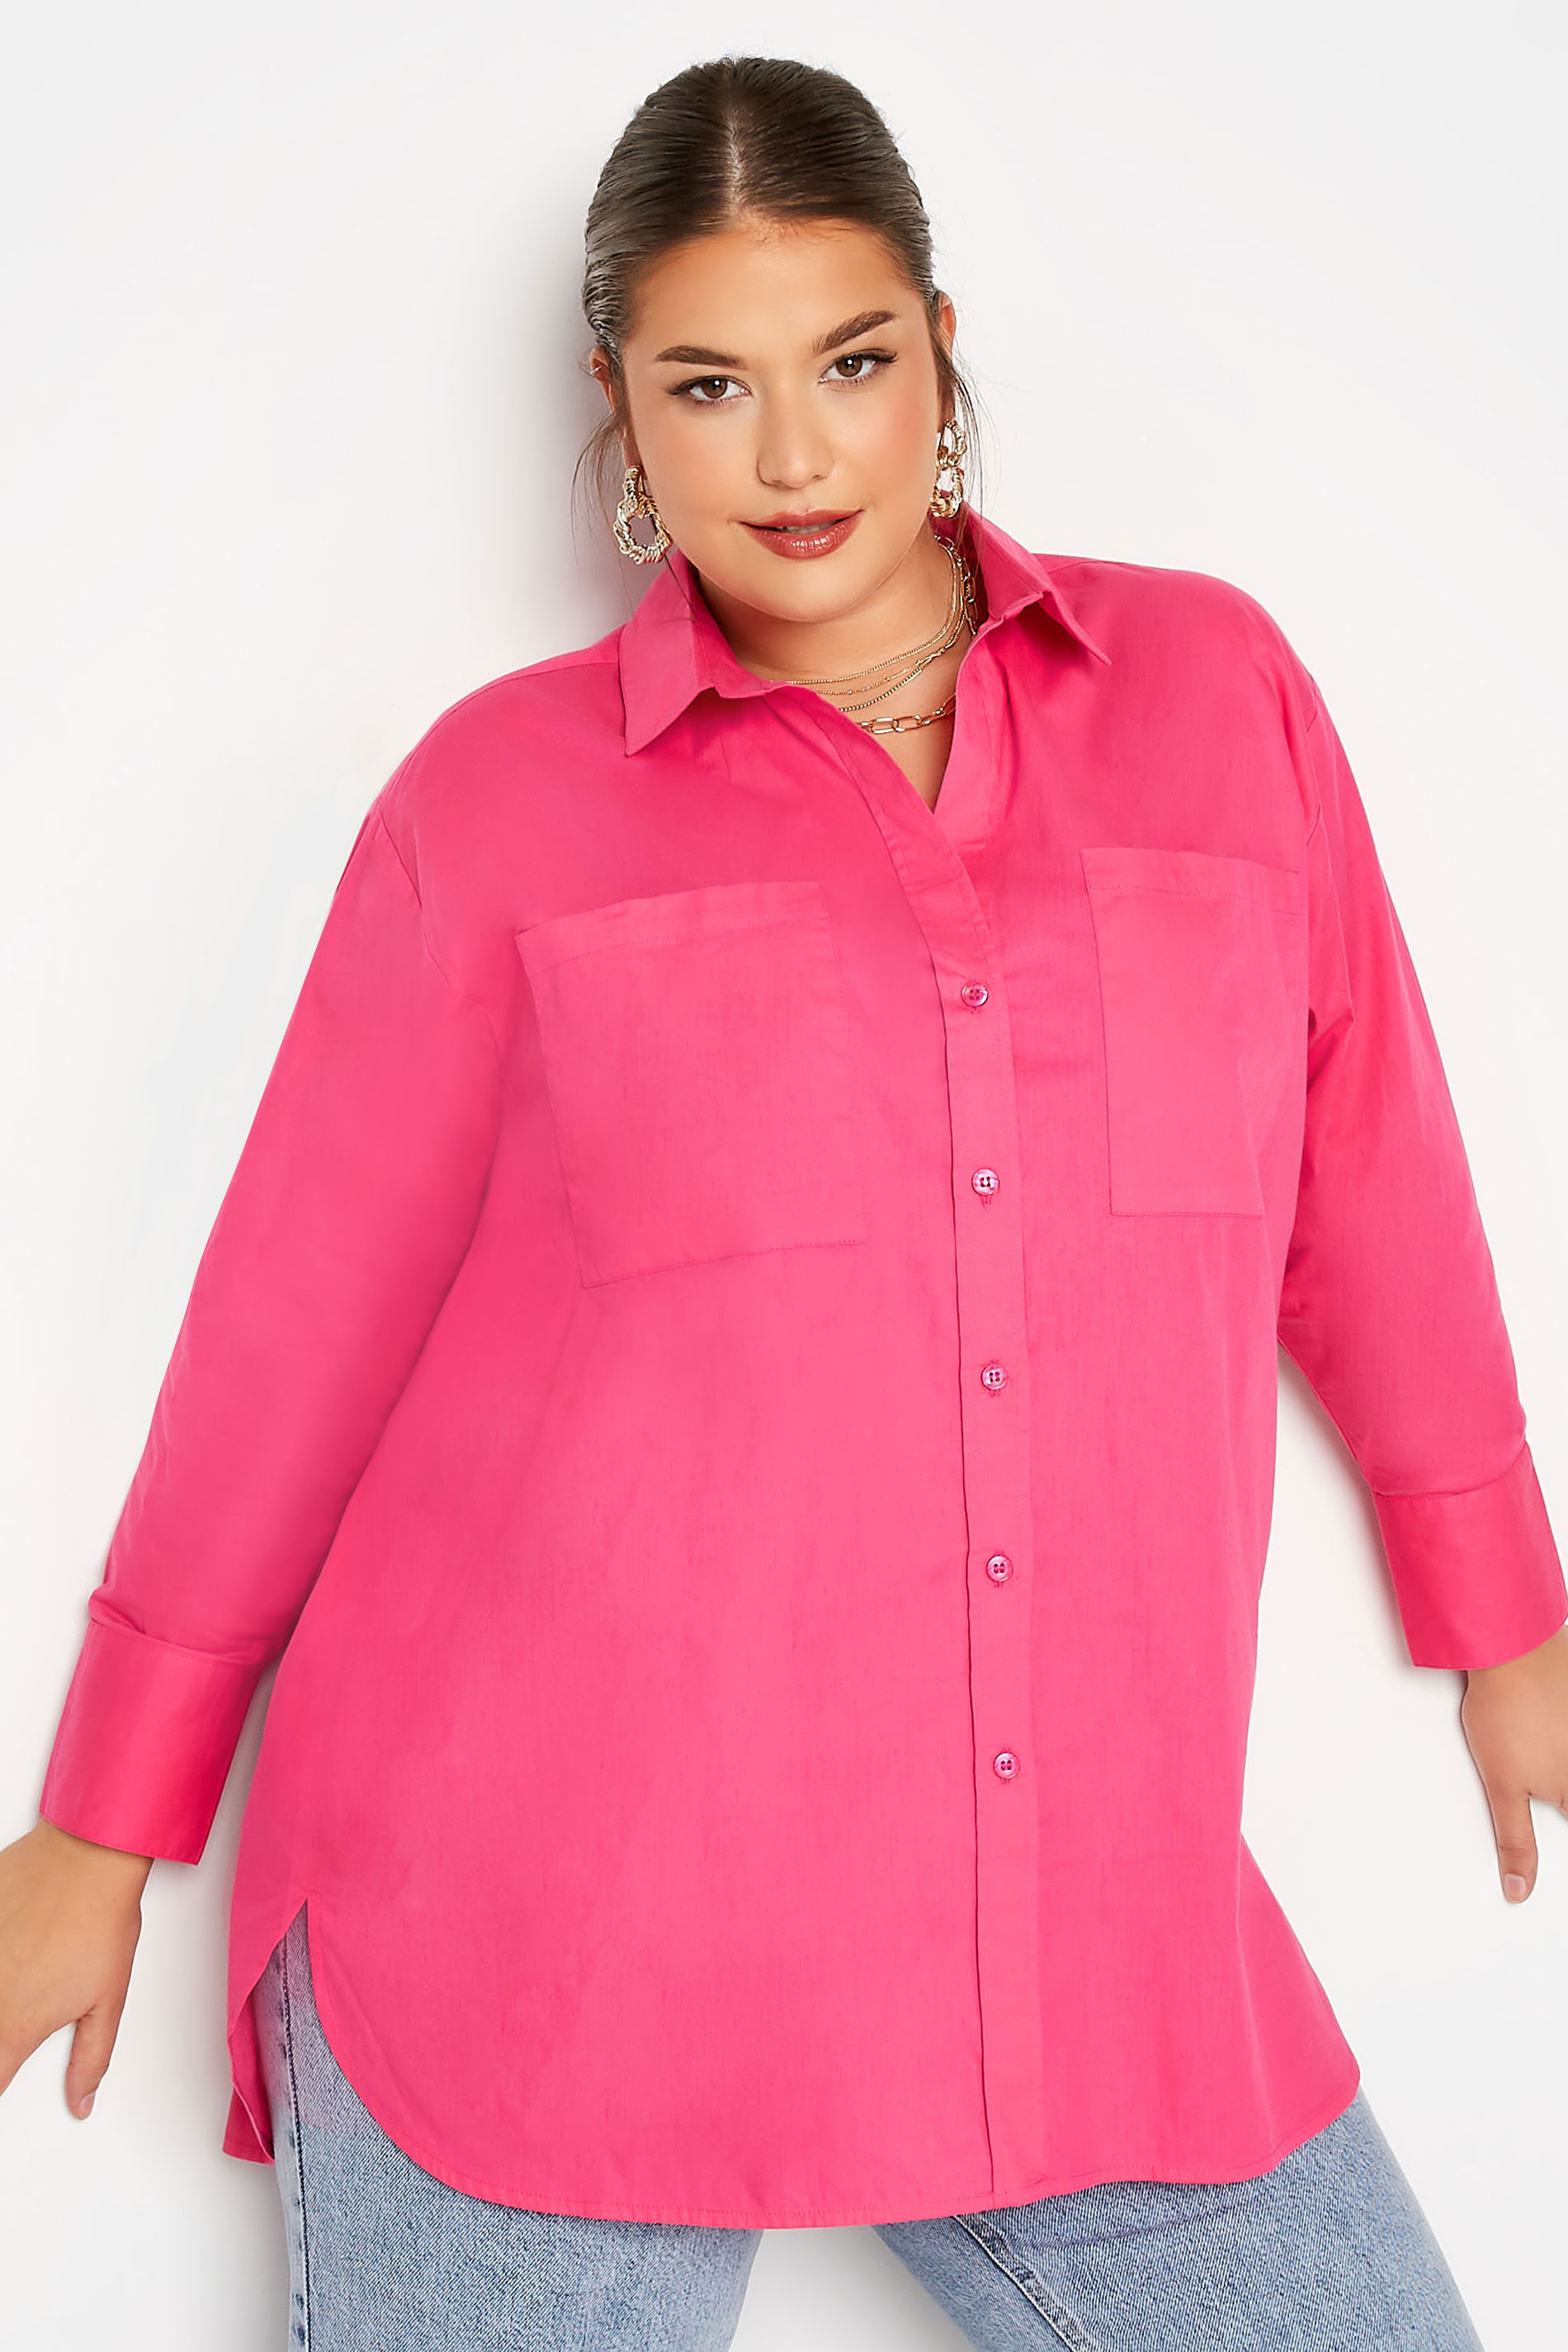 Grande taille  Blouses & Chemisiers Grande taille  Chemisiers | LIMITED COLLECTION - Chemisier Rose Bonbon Oversize Boyfriend - PL85349